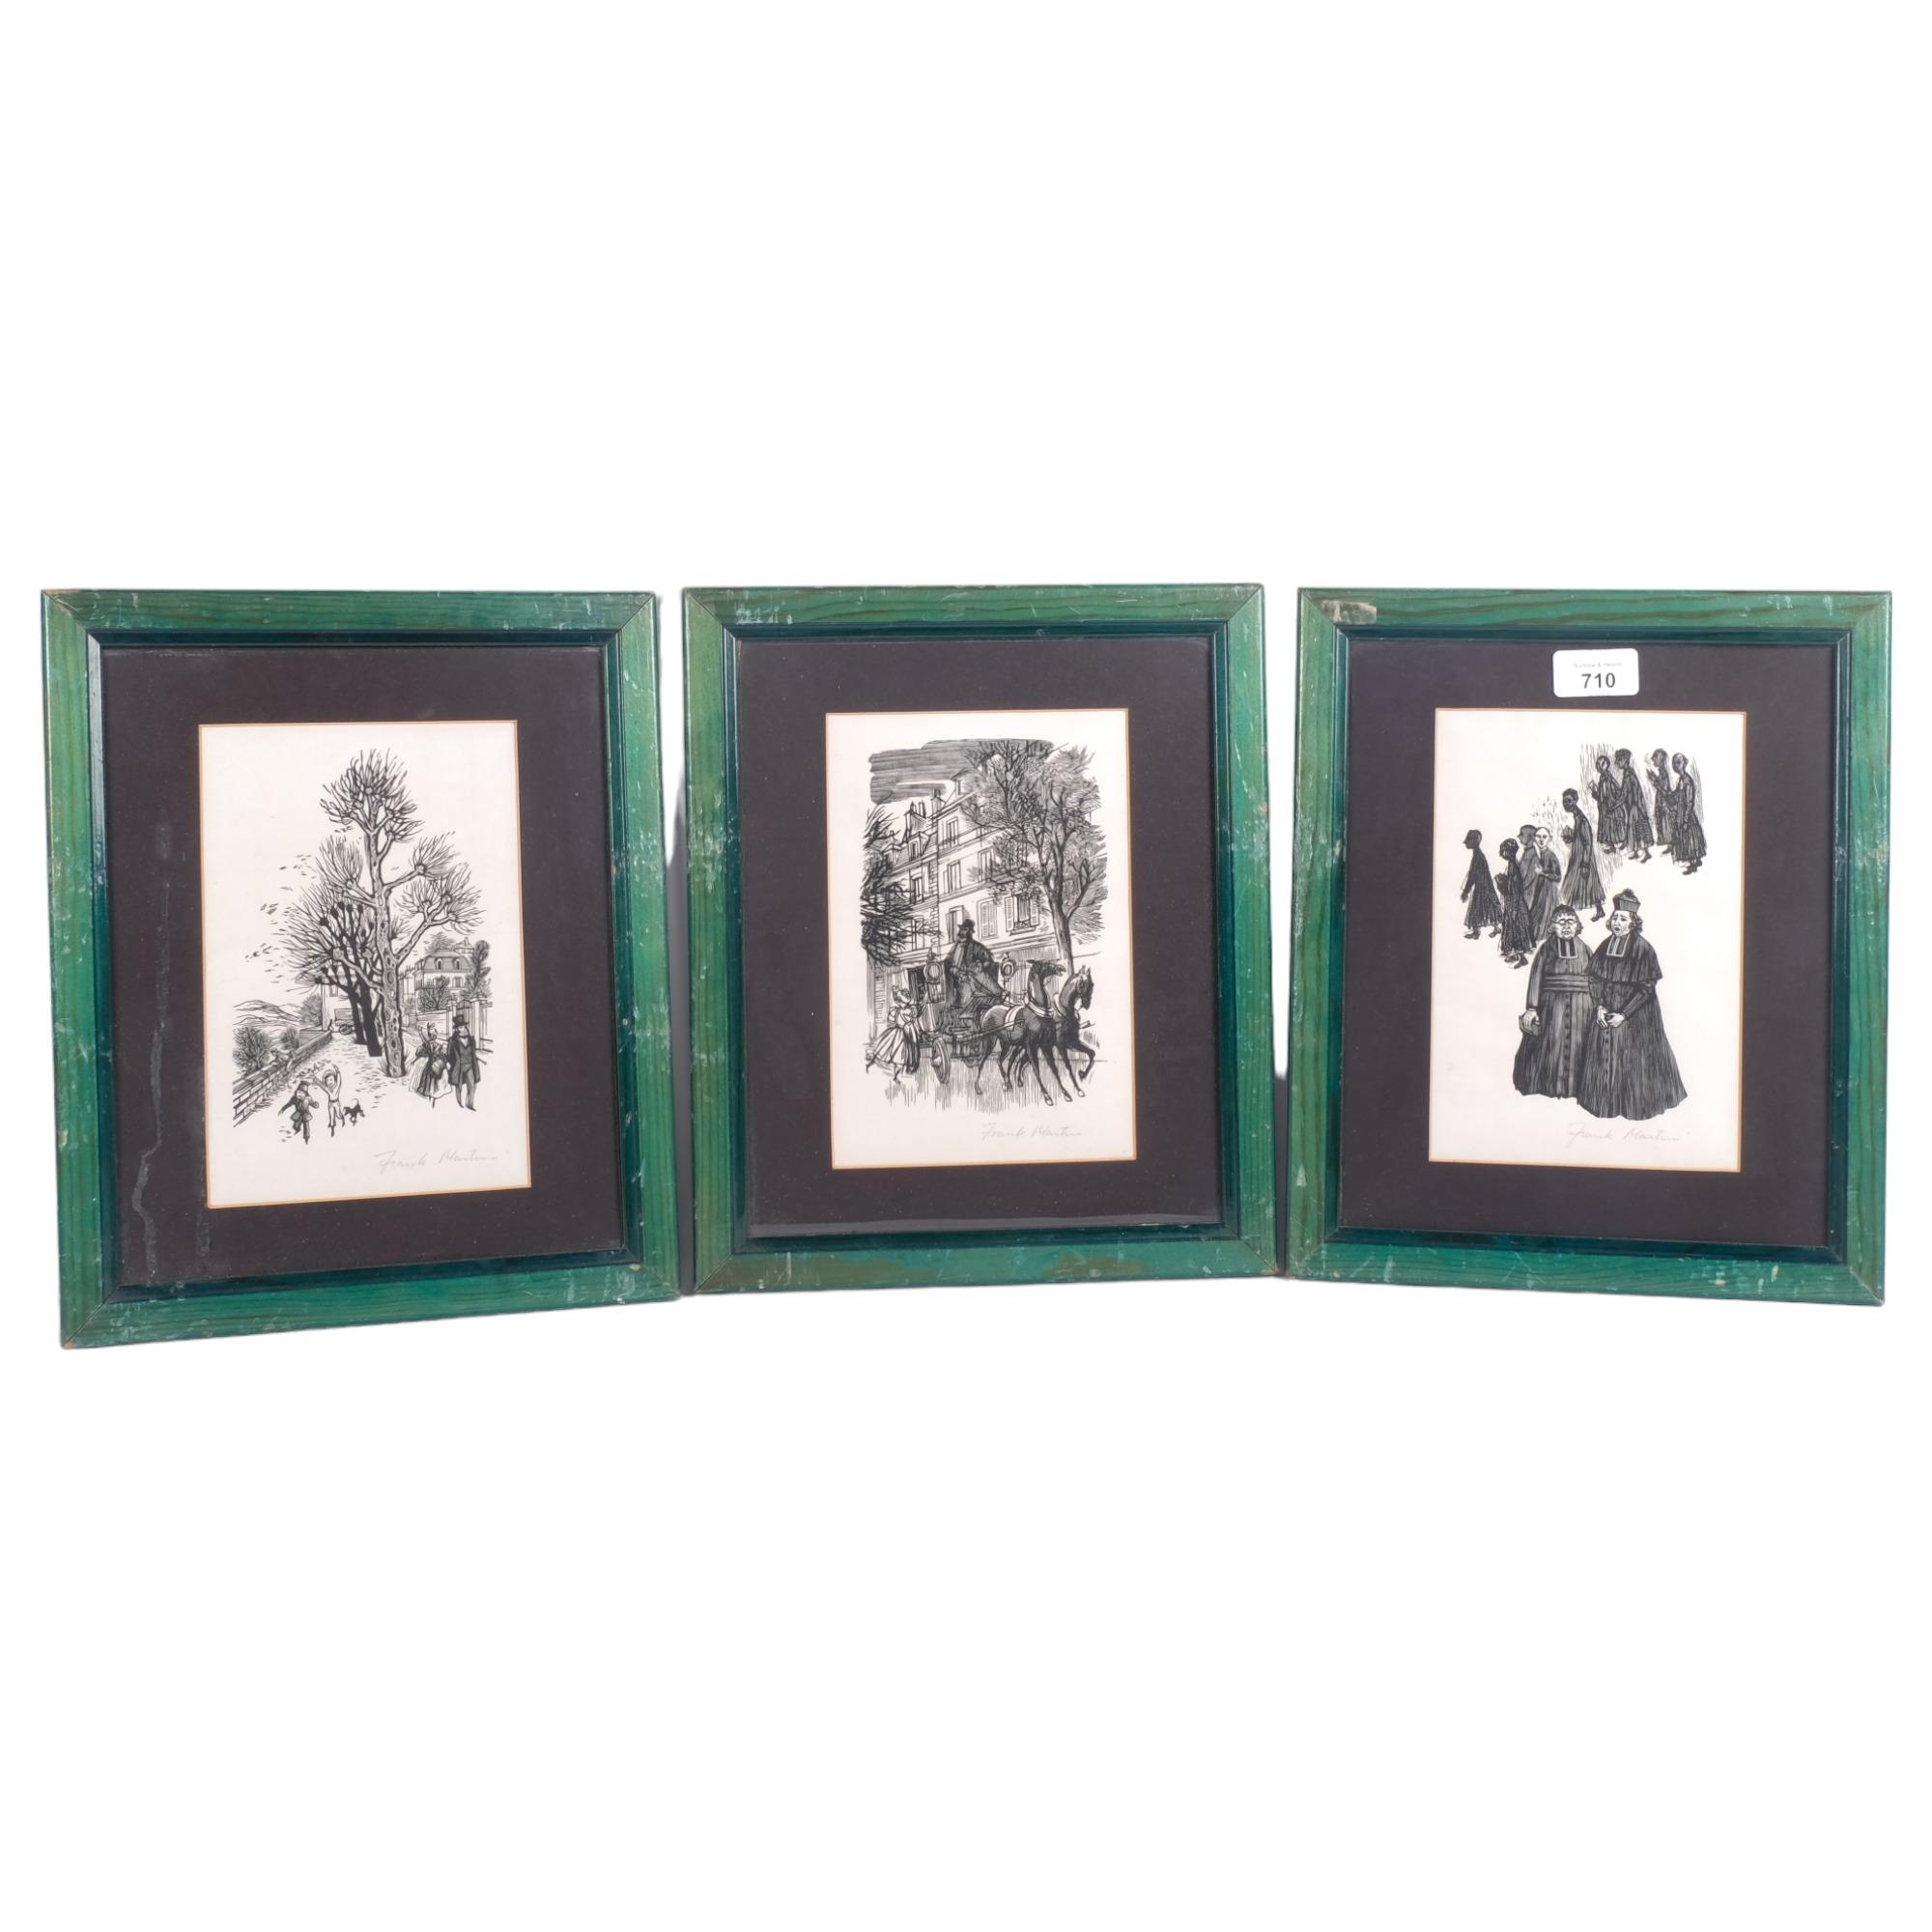 Frank Martin, 3 framed wood-cut engravings, scenes depicting a horse-drawn carriage, religious group